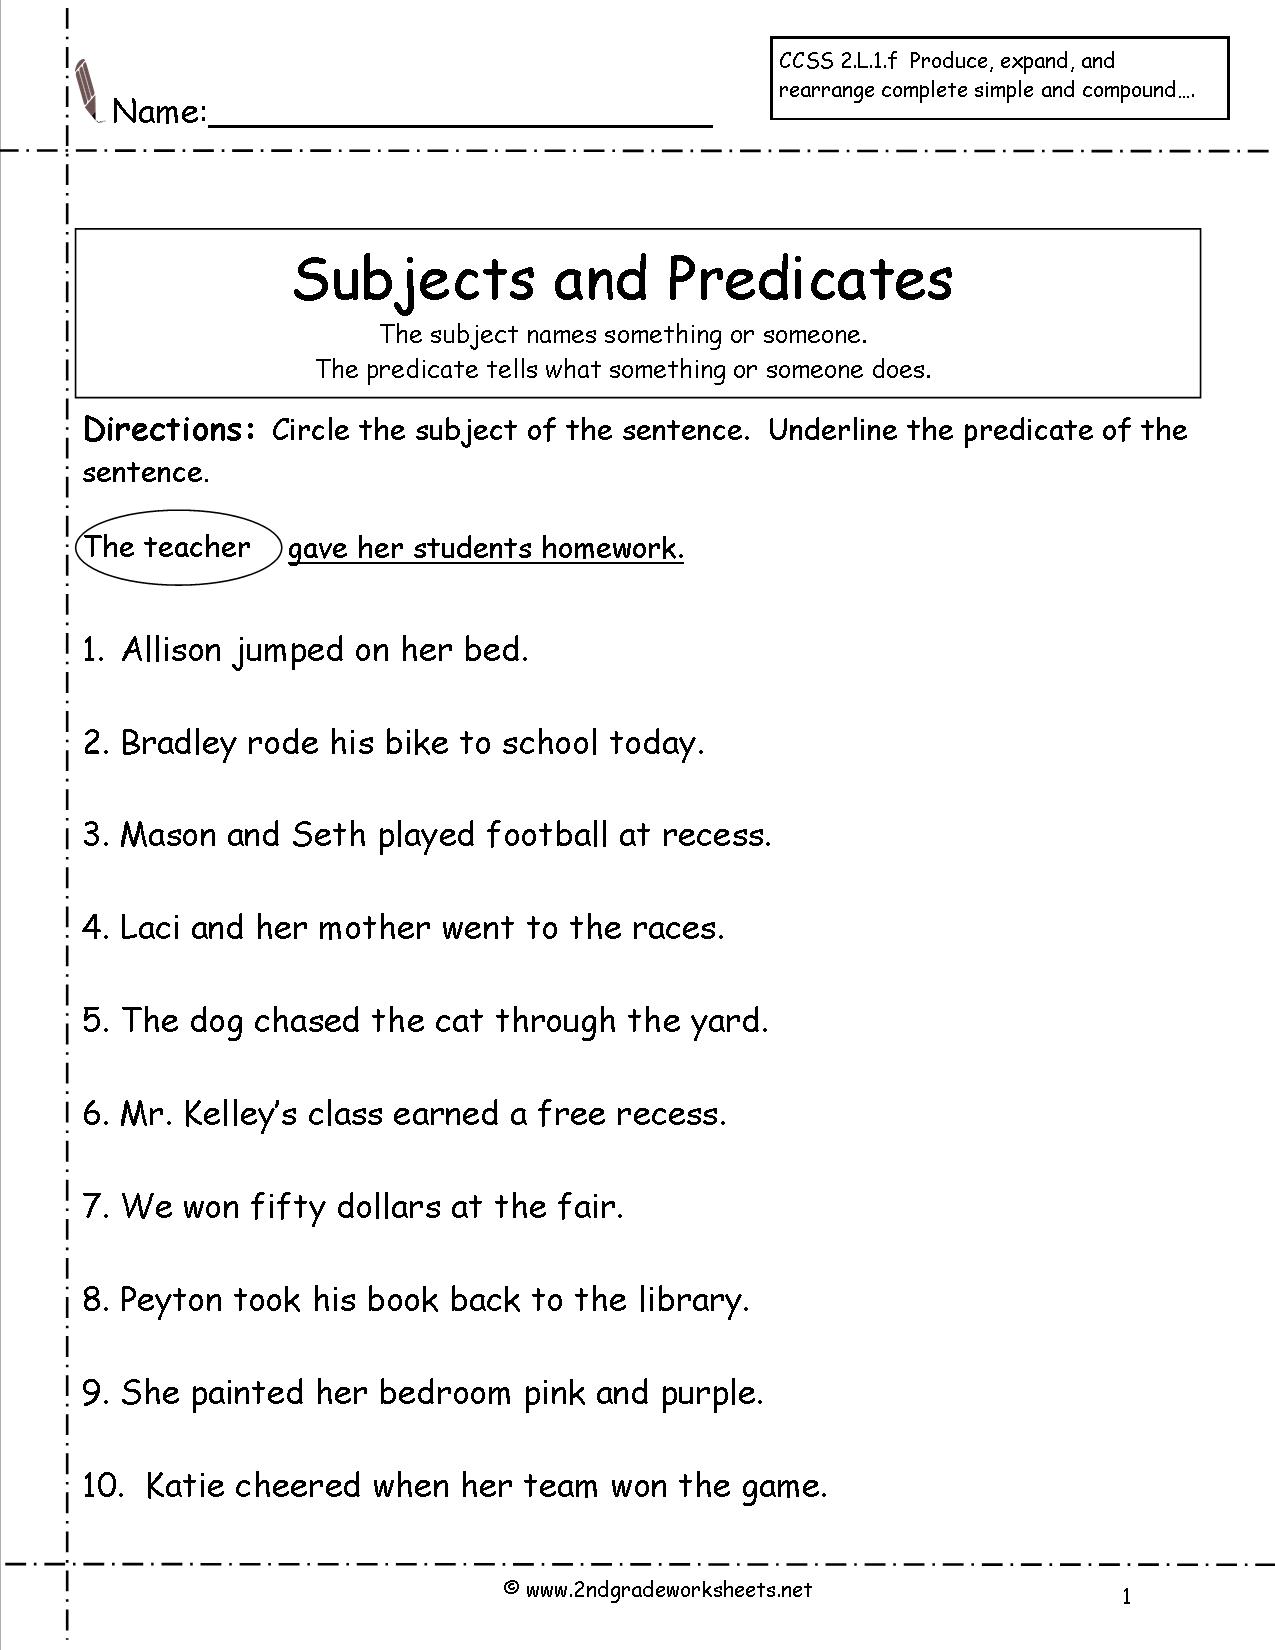 Simple And Complete Subjects And Predicates Worksheet 1244258